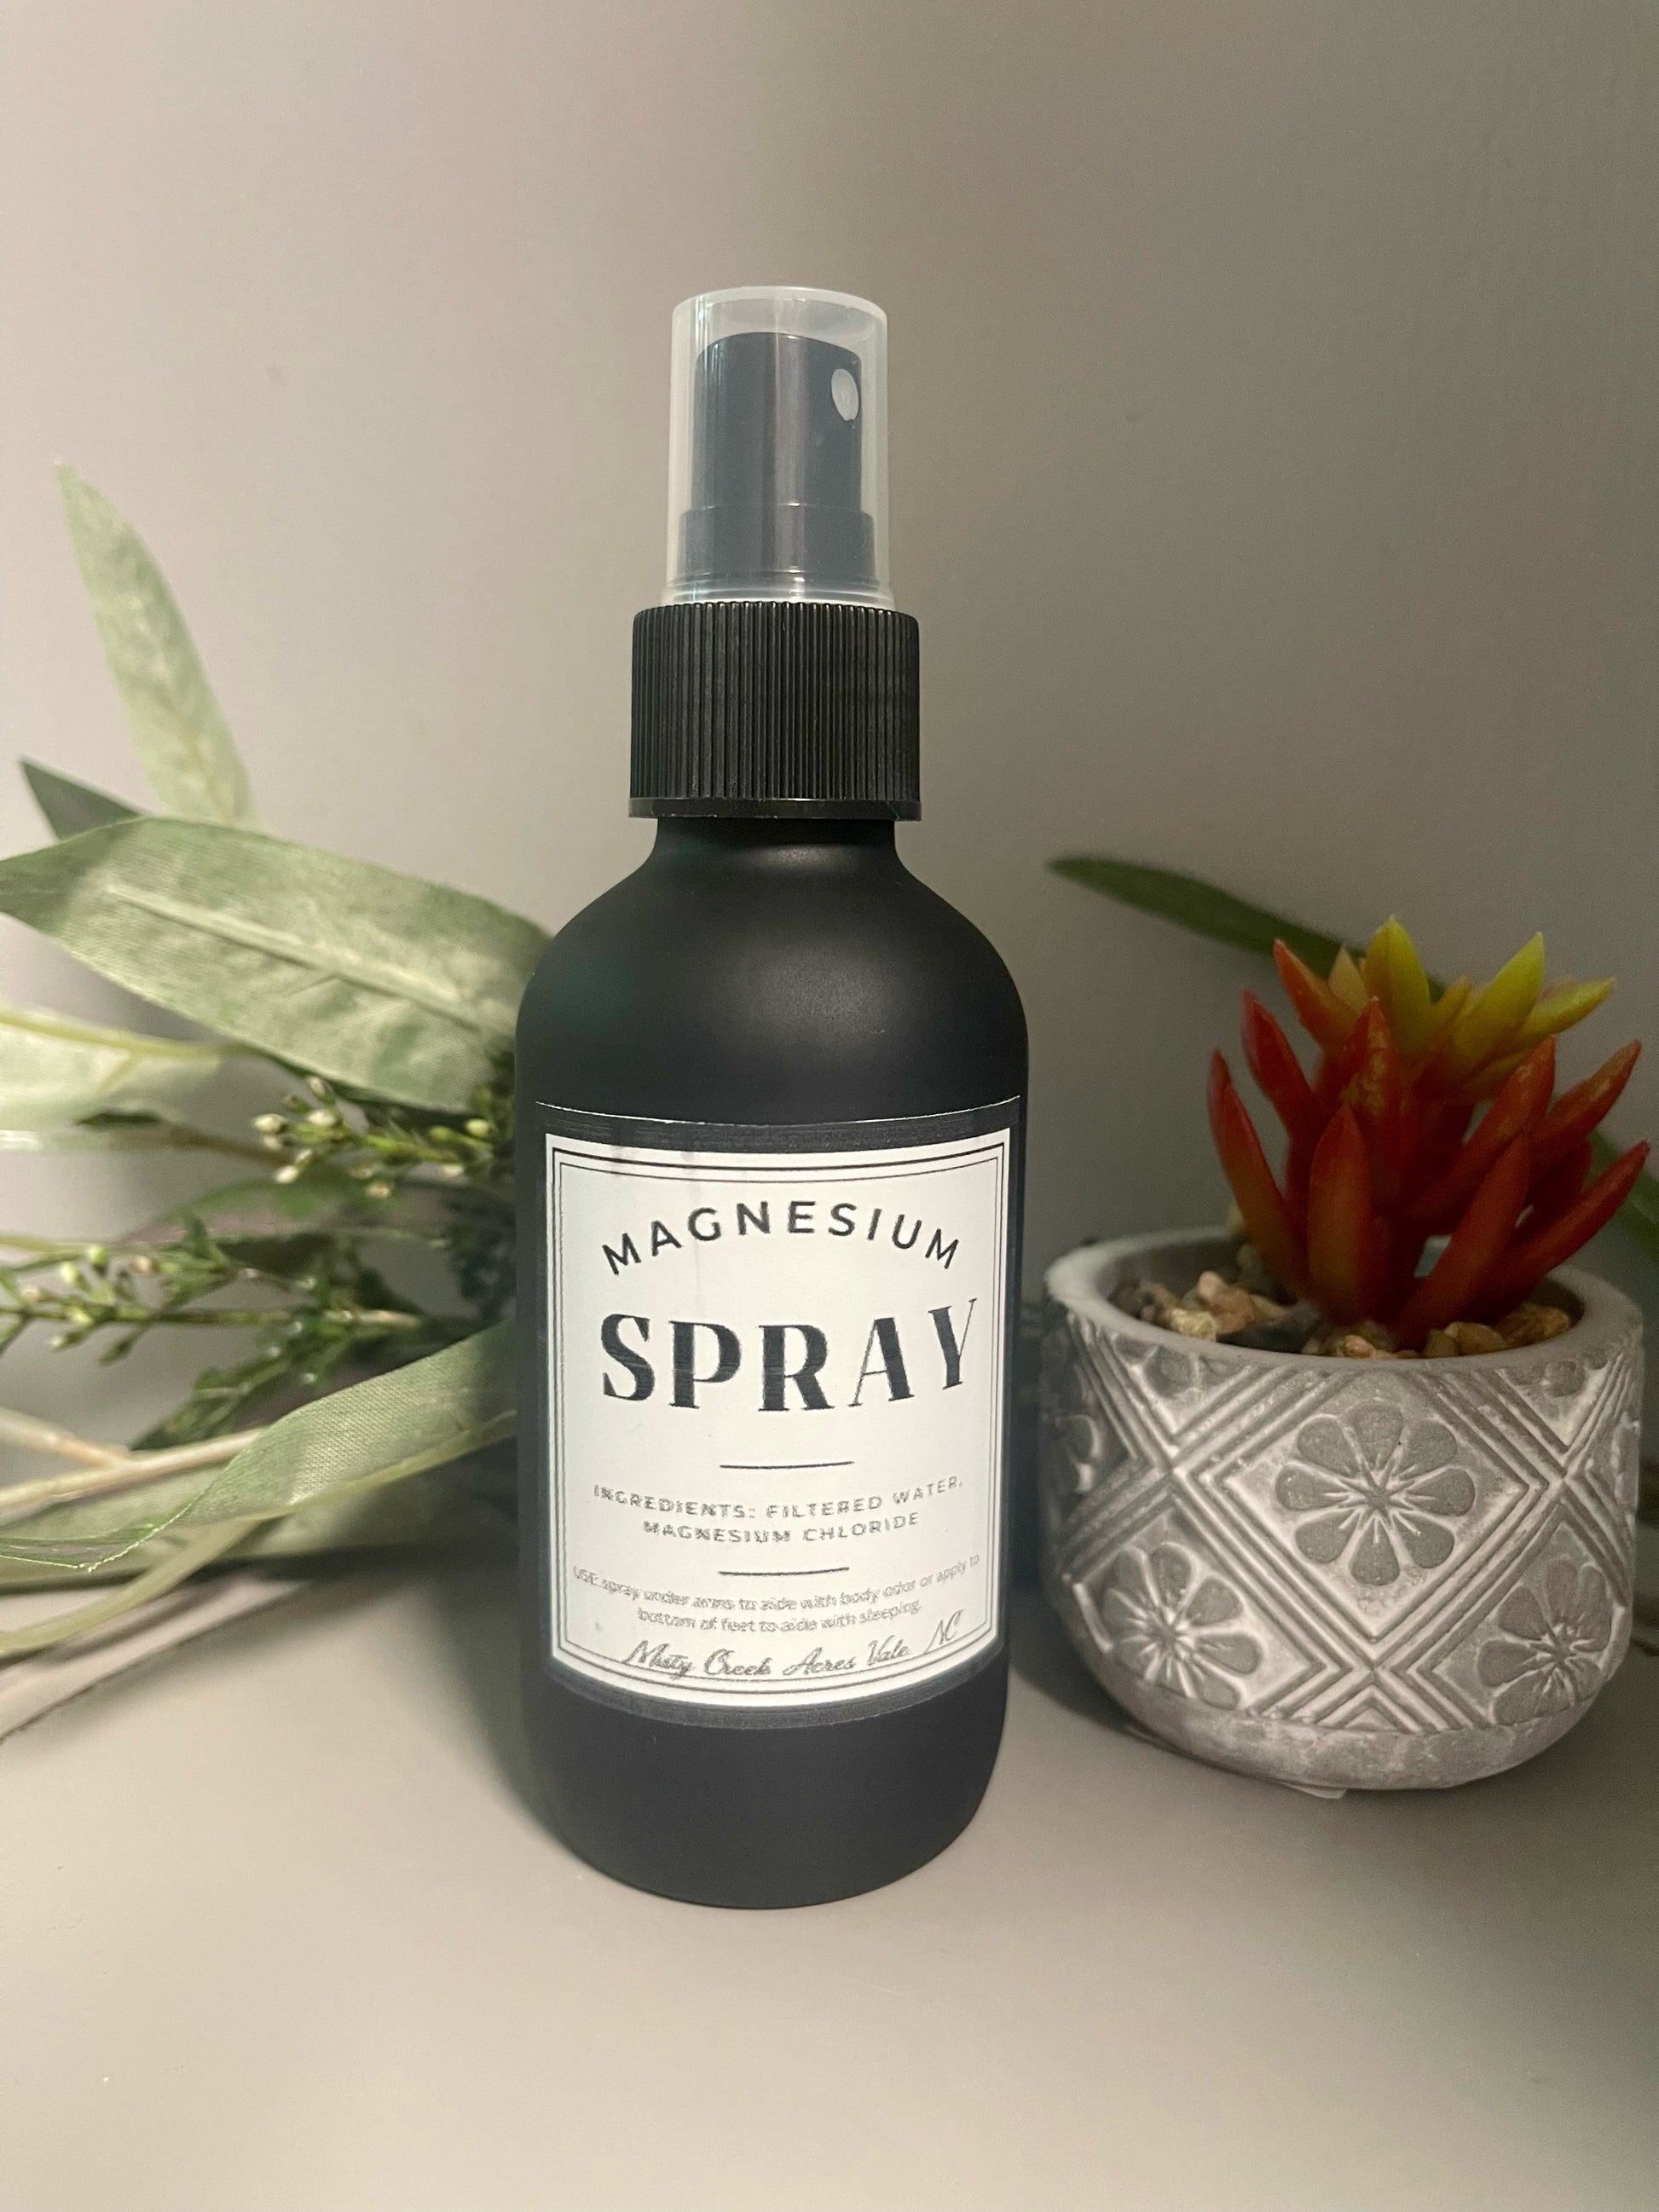 Magnesium spray, fragrance free magnesium spray, magnesium spray for sleep, magnesium deodorant spray, magnesium spray with clean ingredients, small batch magnesium spray, Homesteading products, holistic medicine kit, holistic muscle relief